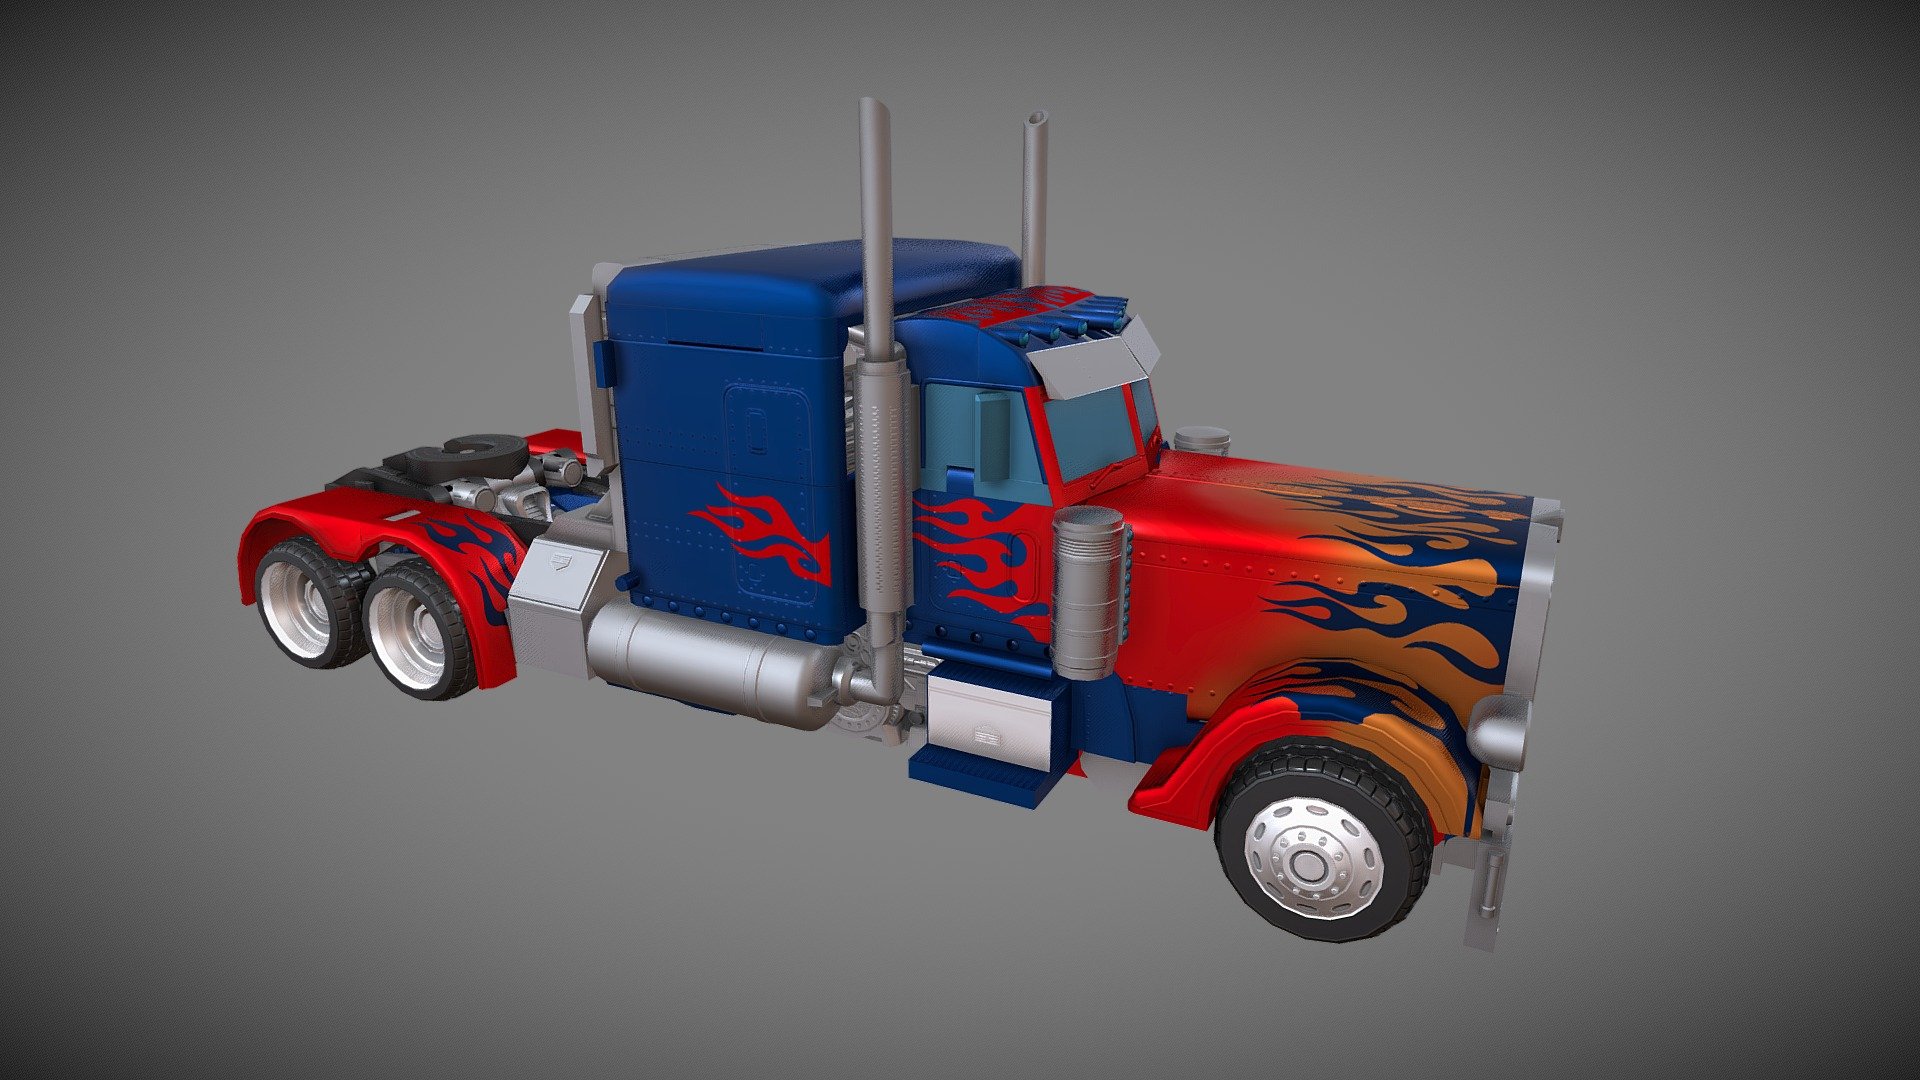 Complex model display of Optimus Prime, modelled in 3DS Max over several weeks. Made for showcase purposes.

This is fan art, replicated from a Revenge of the Fallen Leader Class Optimus Prime Action Figure. The mesh and textures are my creation, but the design belongs to Hasbro, and the Michael bay film franchise 3d model